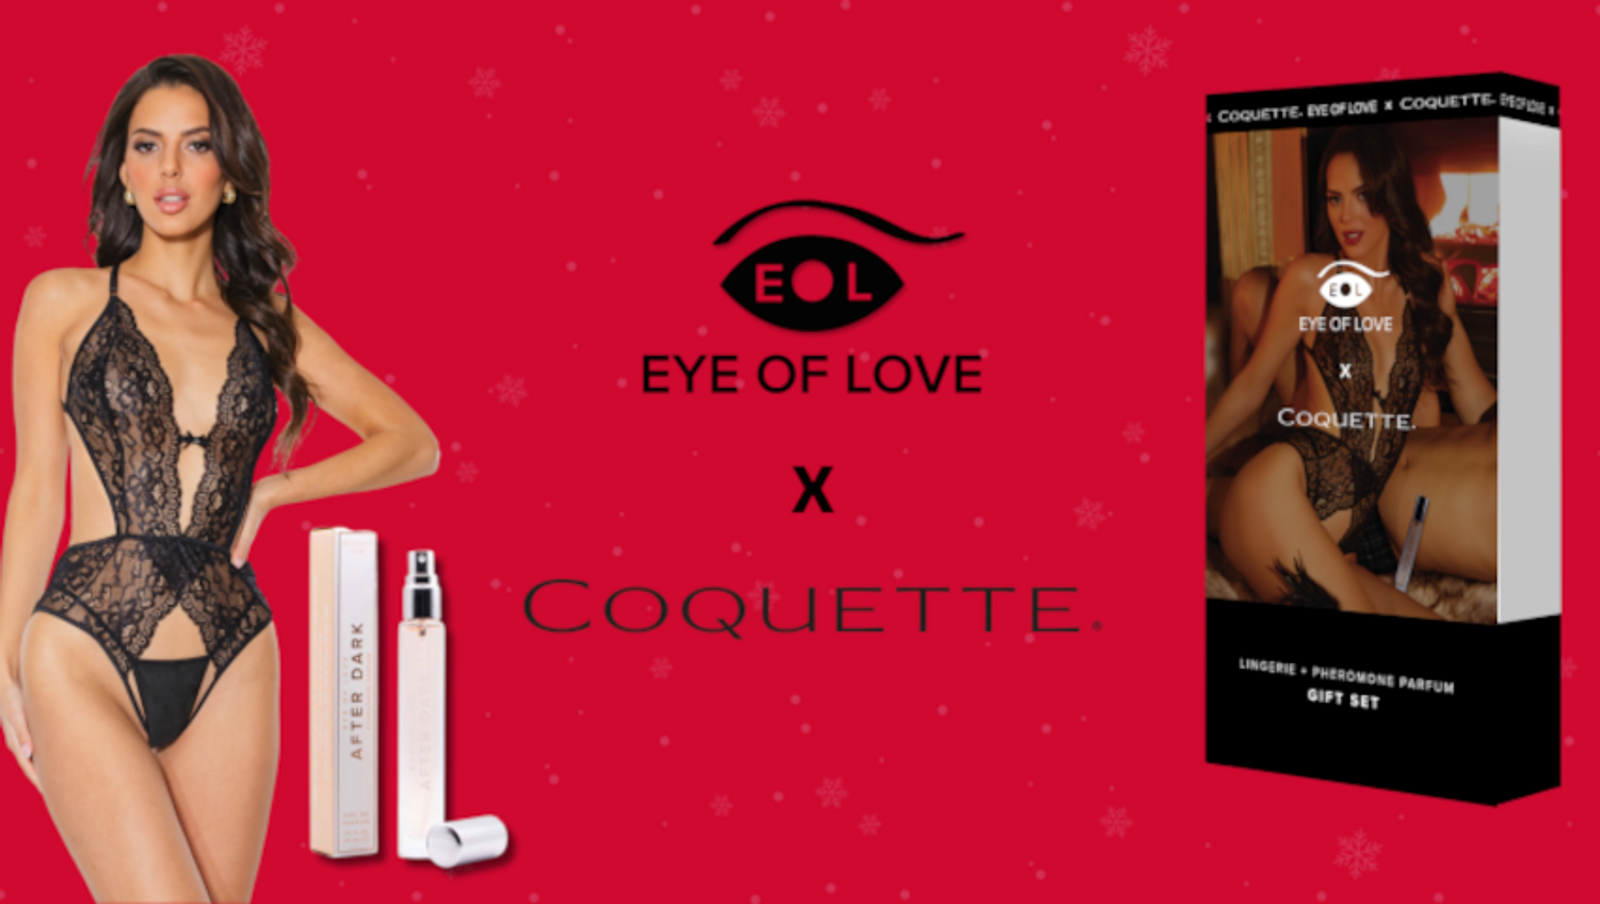 Coquette Lingerie, Eye of Love Unveil Pheromone Holiday Gift Set